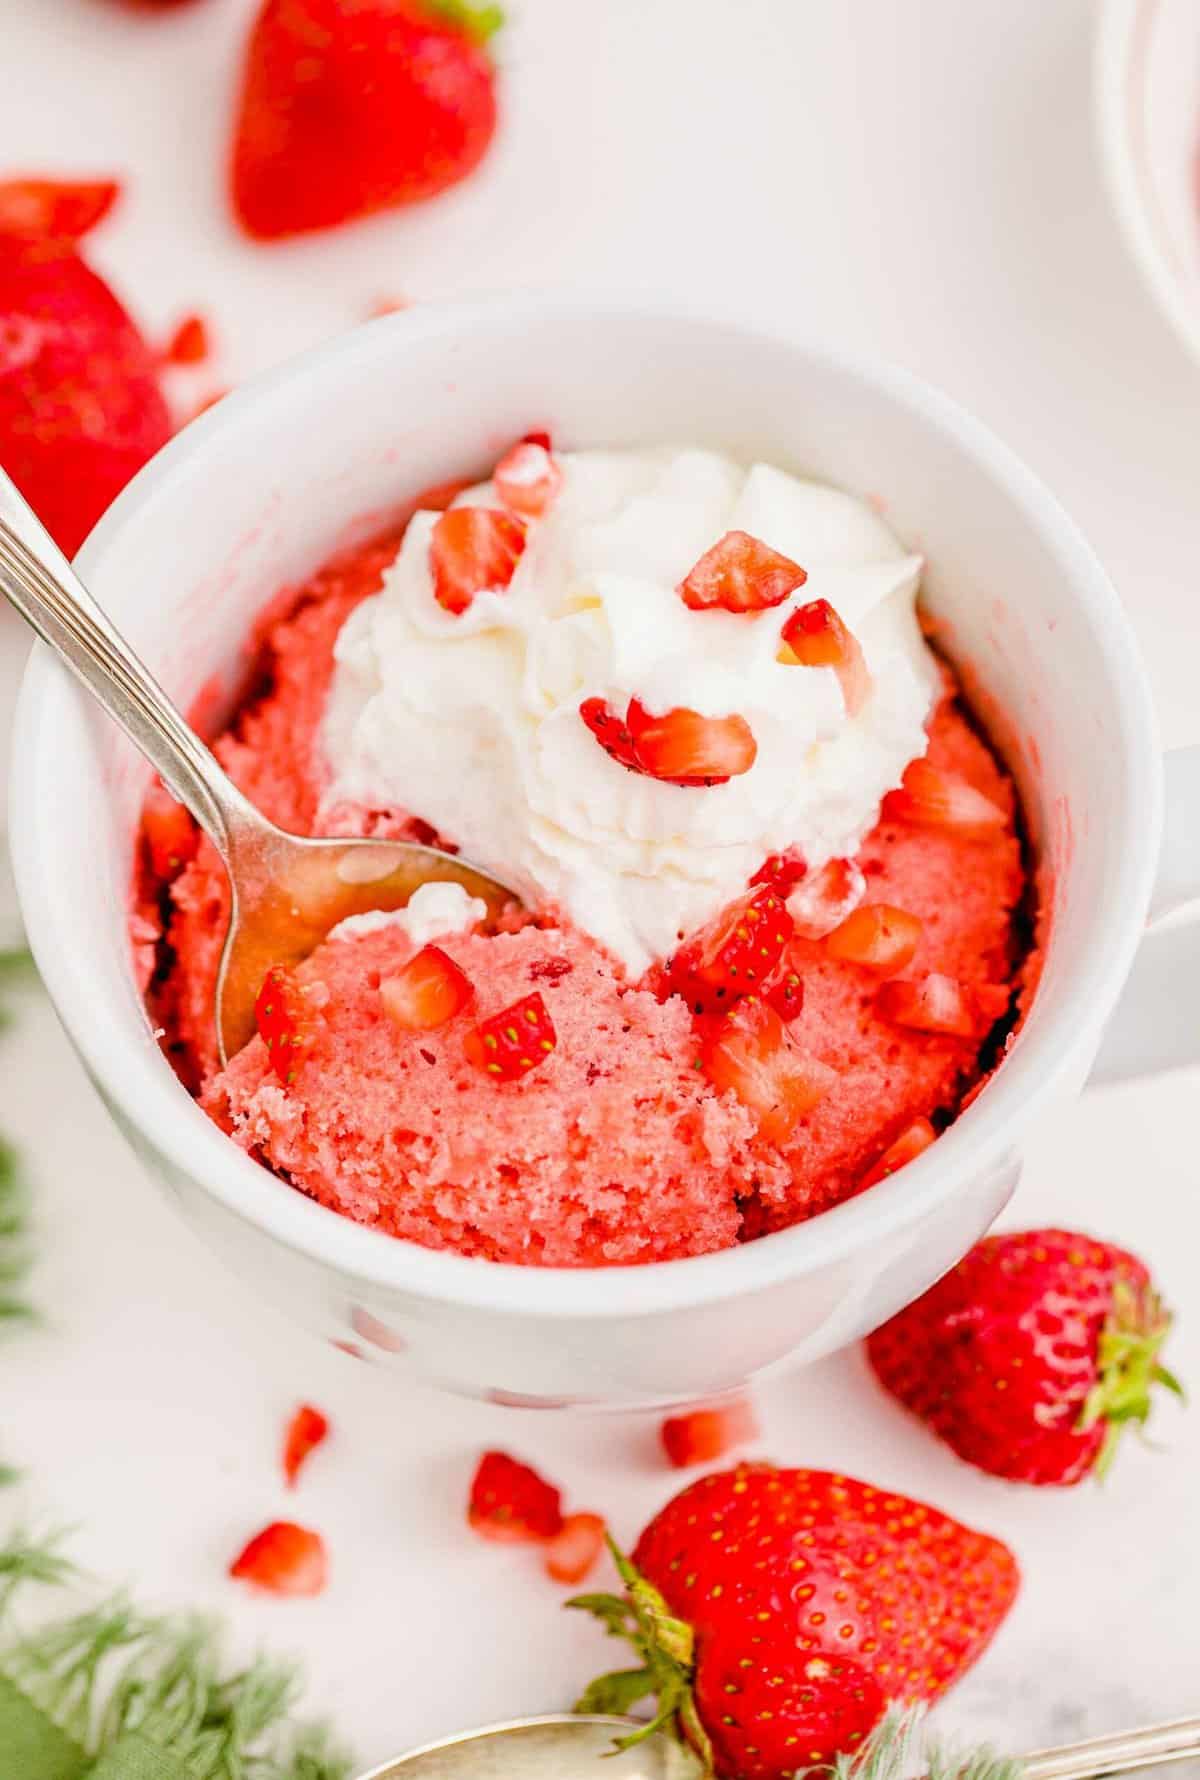 Spoon digging into strawberry mug cake topped with whipped cream